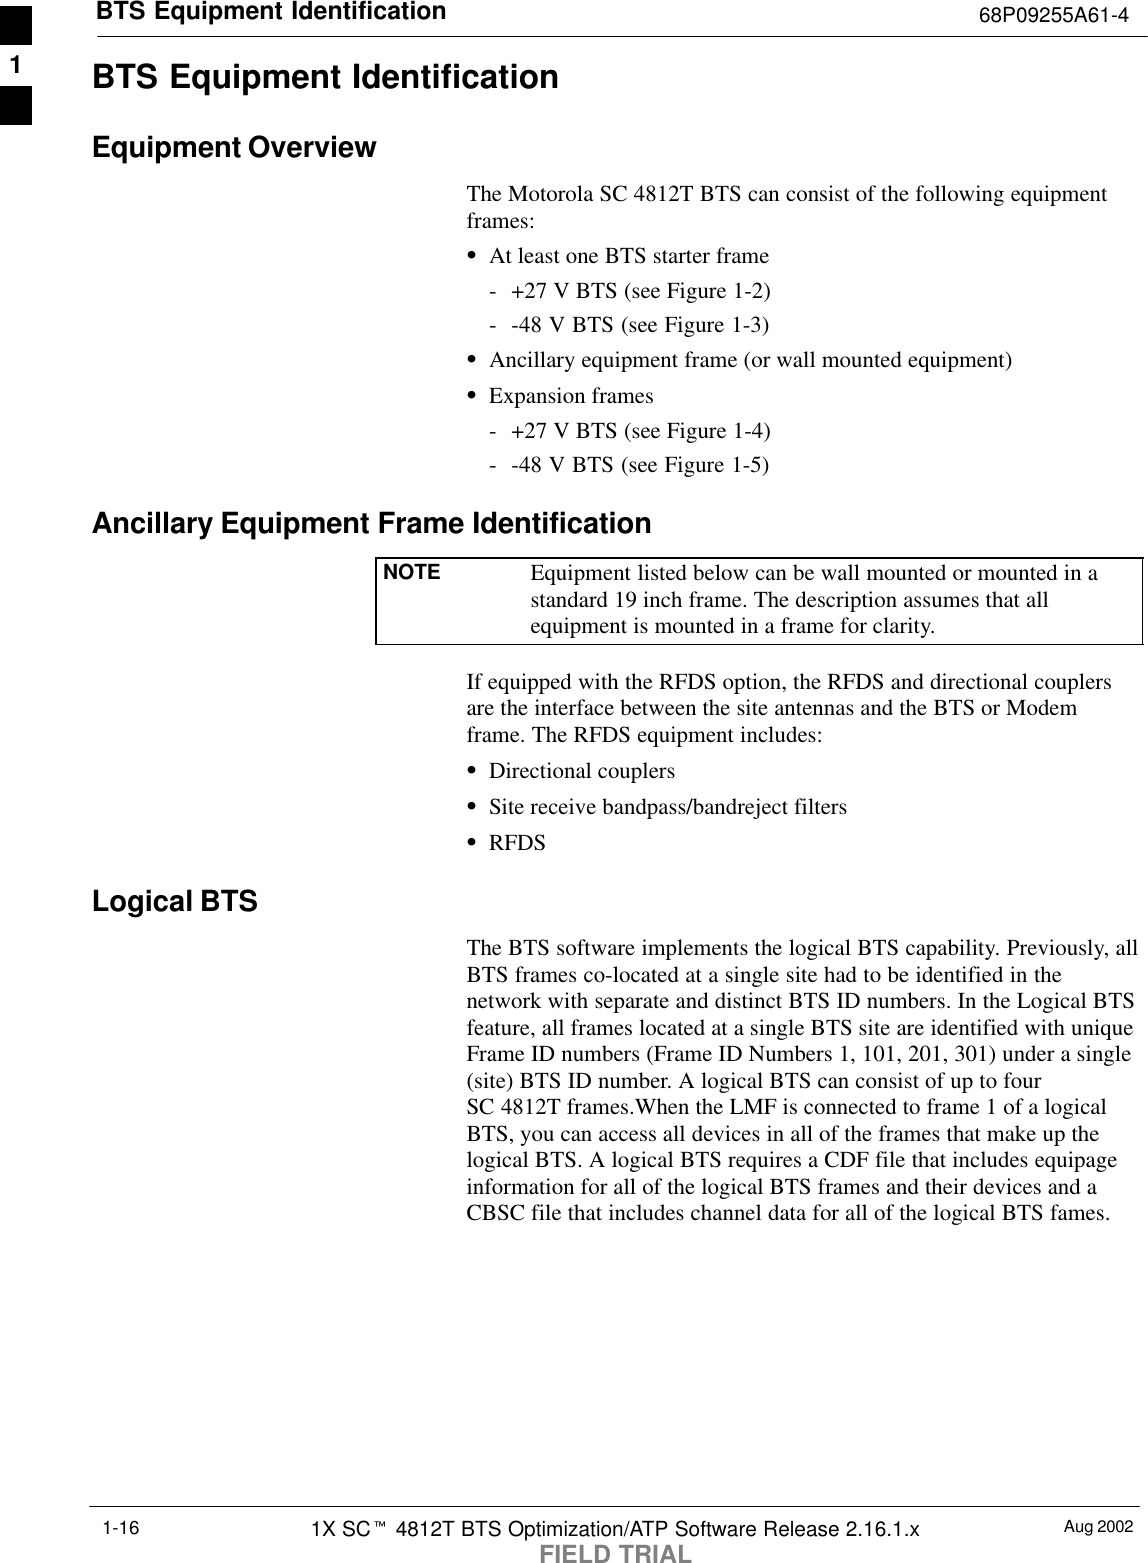 BTS Equipment Identification 68P09255A61-4Aug 20021X SCt 4812T BTS Optimization/ATP Software Release 2.16.1.xFIELD TRIAL1-16BTS Equipment IdentificationEquipment OverviewThe Motorola SC 4812T BTS can consist of the following equipmentframes:SAt least one BTS starter frame- +27 V BTS (see Figure 1-2)- -48 V BTS (see Figure 1-3)SAncillary equipment frame (or wall mounted equipment)SExpansion frames- +27 V BTS (see Figure 1-4)- -48 V BTS (see Figure 1-5)Ancillary Equipment Frame IdentificationNOTE Equipment listed below can be wall mounted or mounted in astandard 19 inch frame. The description assumes that allequipment is mounted in a frame for clarity.If equipped with the RFDS option, the RFDS and directional couplersare the interface between the site antennas and the BTS or Modemframe. The RFDS equipment includes:SDirectional couplersSSite receive bandpass/bandreject filtersSRFDSLogical BTSThe BTS software implements the logical BTS capability. Previously, allBTS frames co-located at a single site had to be identified in thenetwork with separate and distinct BTS ID numbers. In the Logical BTSfeature, all frames located at a single BTS site are identified with uniqueFrame ID numbers (Frame ID Numbers 1, 101, 201, 301) under a single(site) BTS ID number. A logical BTS can consist of up to fourSC 4812T frames.When the LMF is connected to frame 1 of a logicalBTS, you can access all devices in all of the frames that make up thelogical BTS. A logical BTS requires a CDF file that includes equipageinformation for all of the logical BTS frames and their devices and aCBSC file that includes channel data for all of the logical BTS fames.1